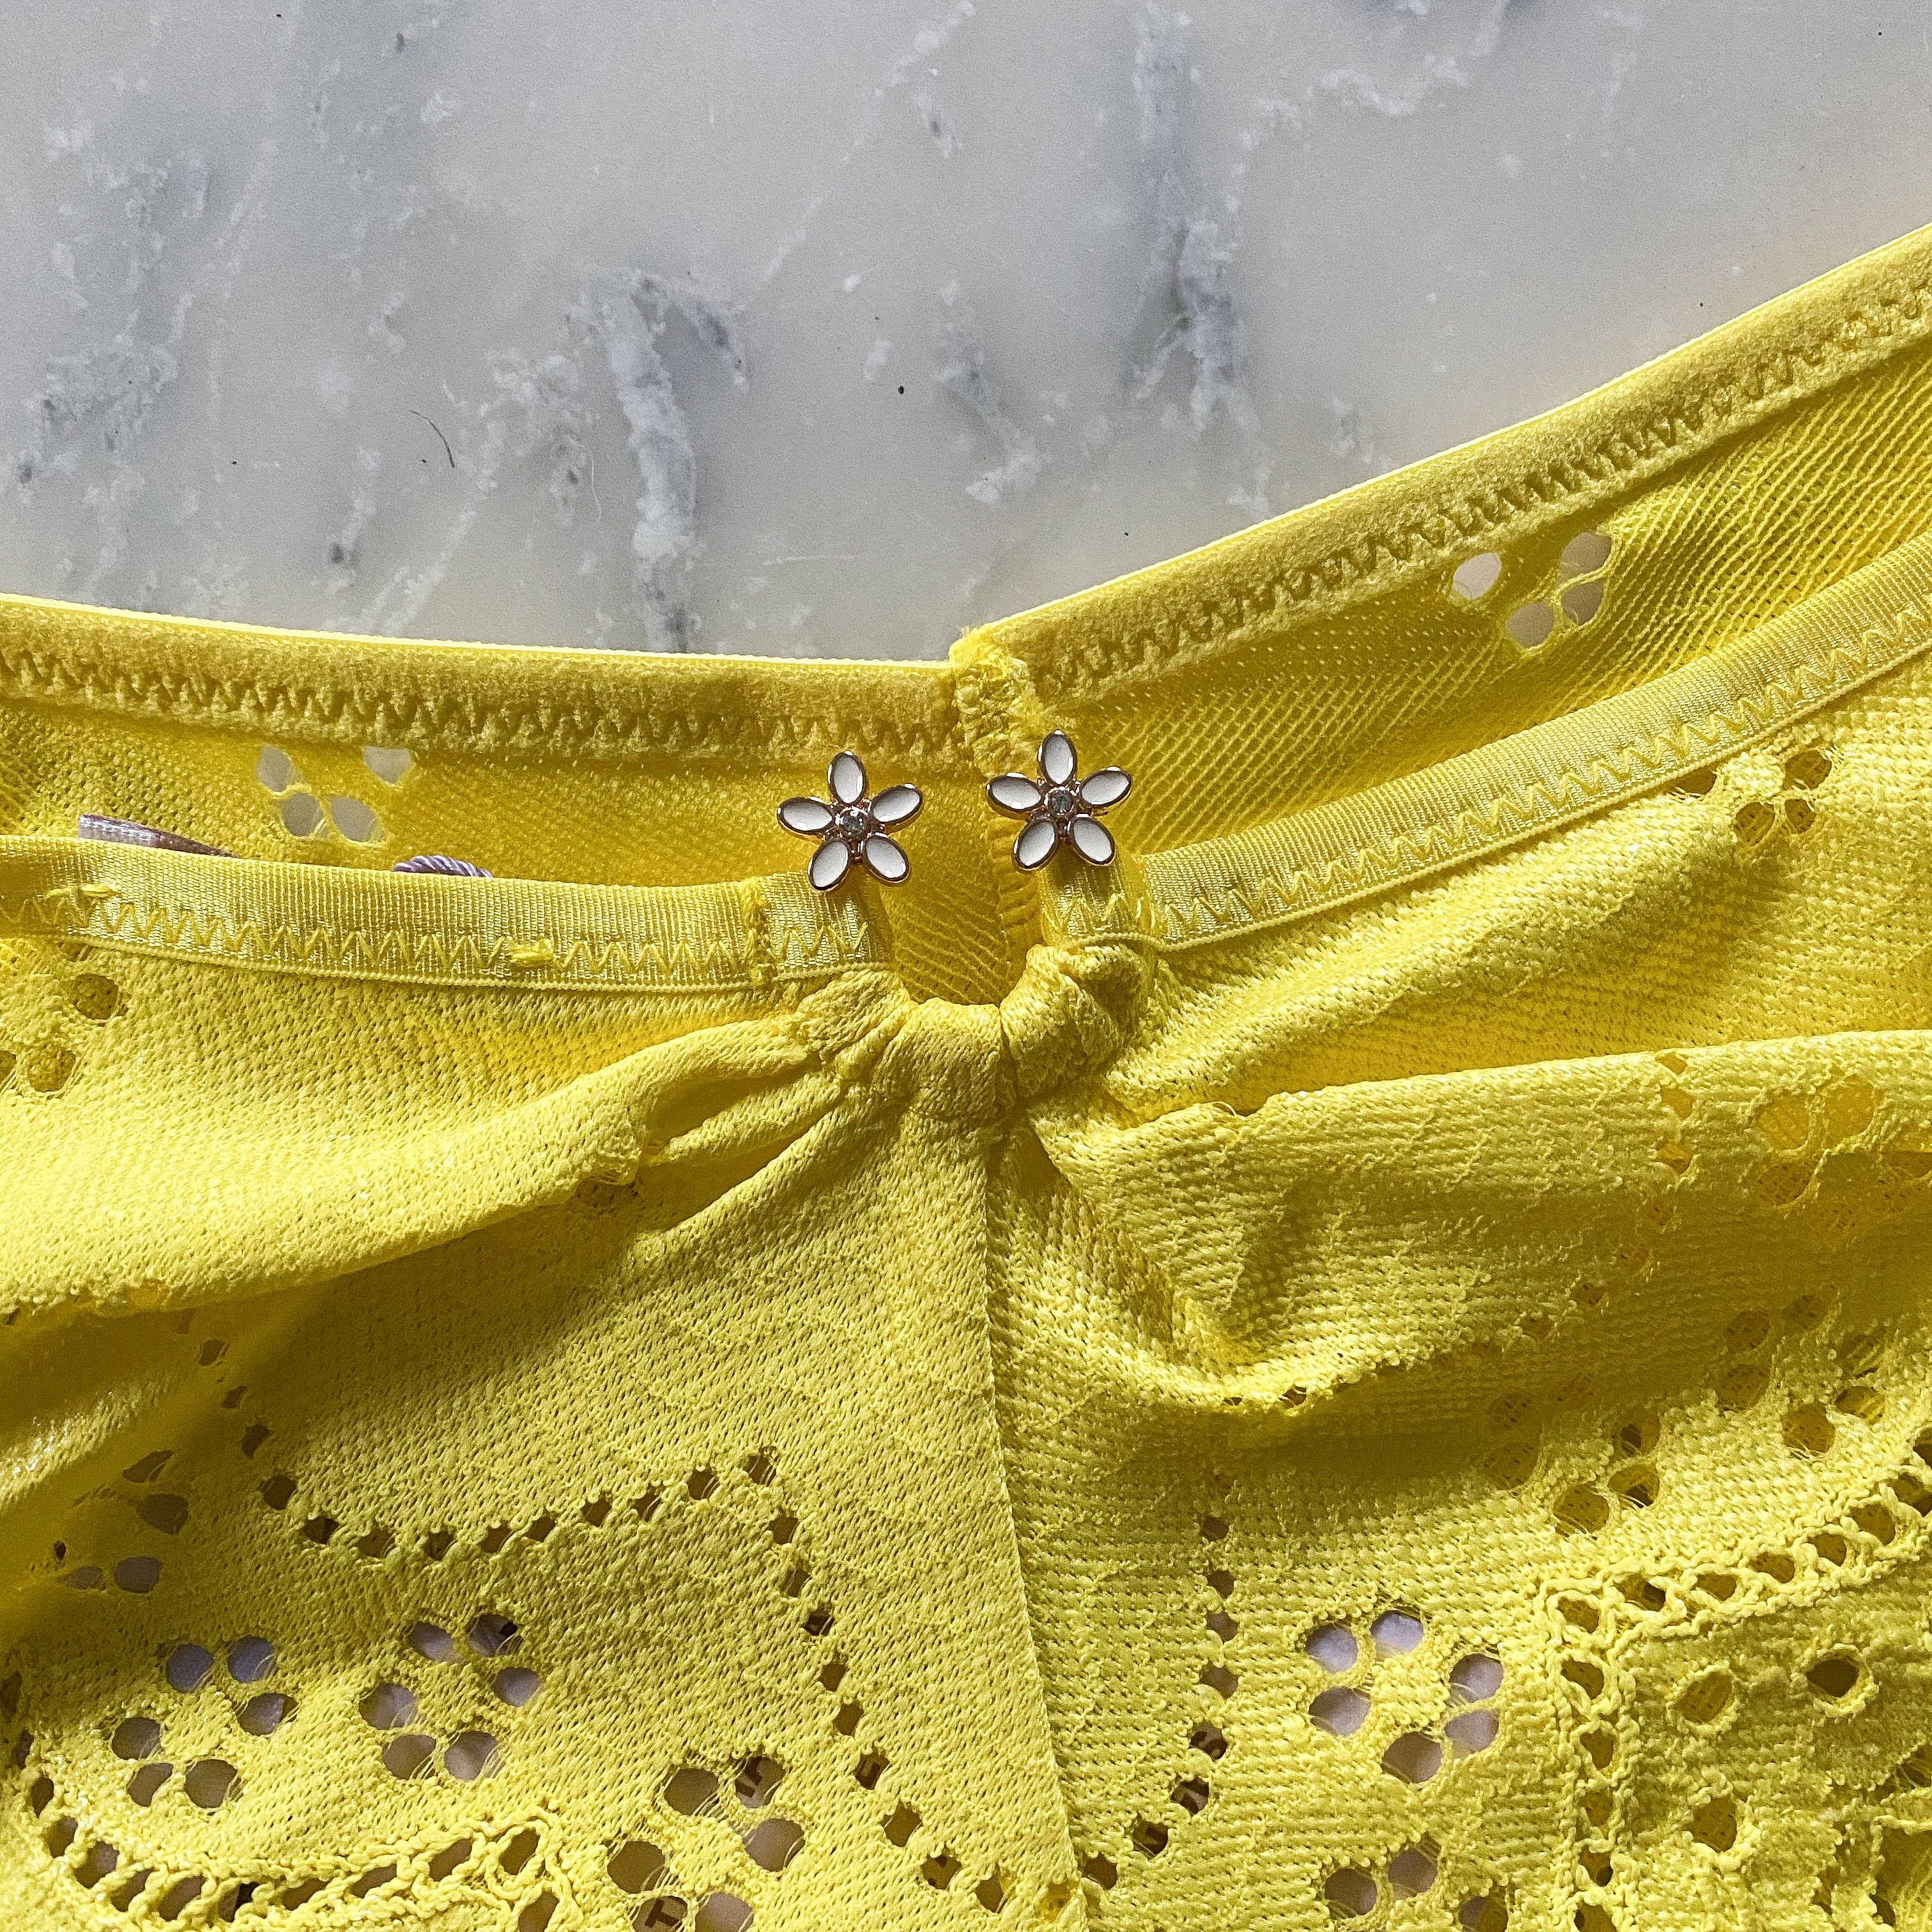 Bombshell Broderie Unlined Lace Balconette Bra in Yellow